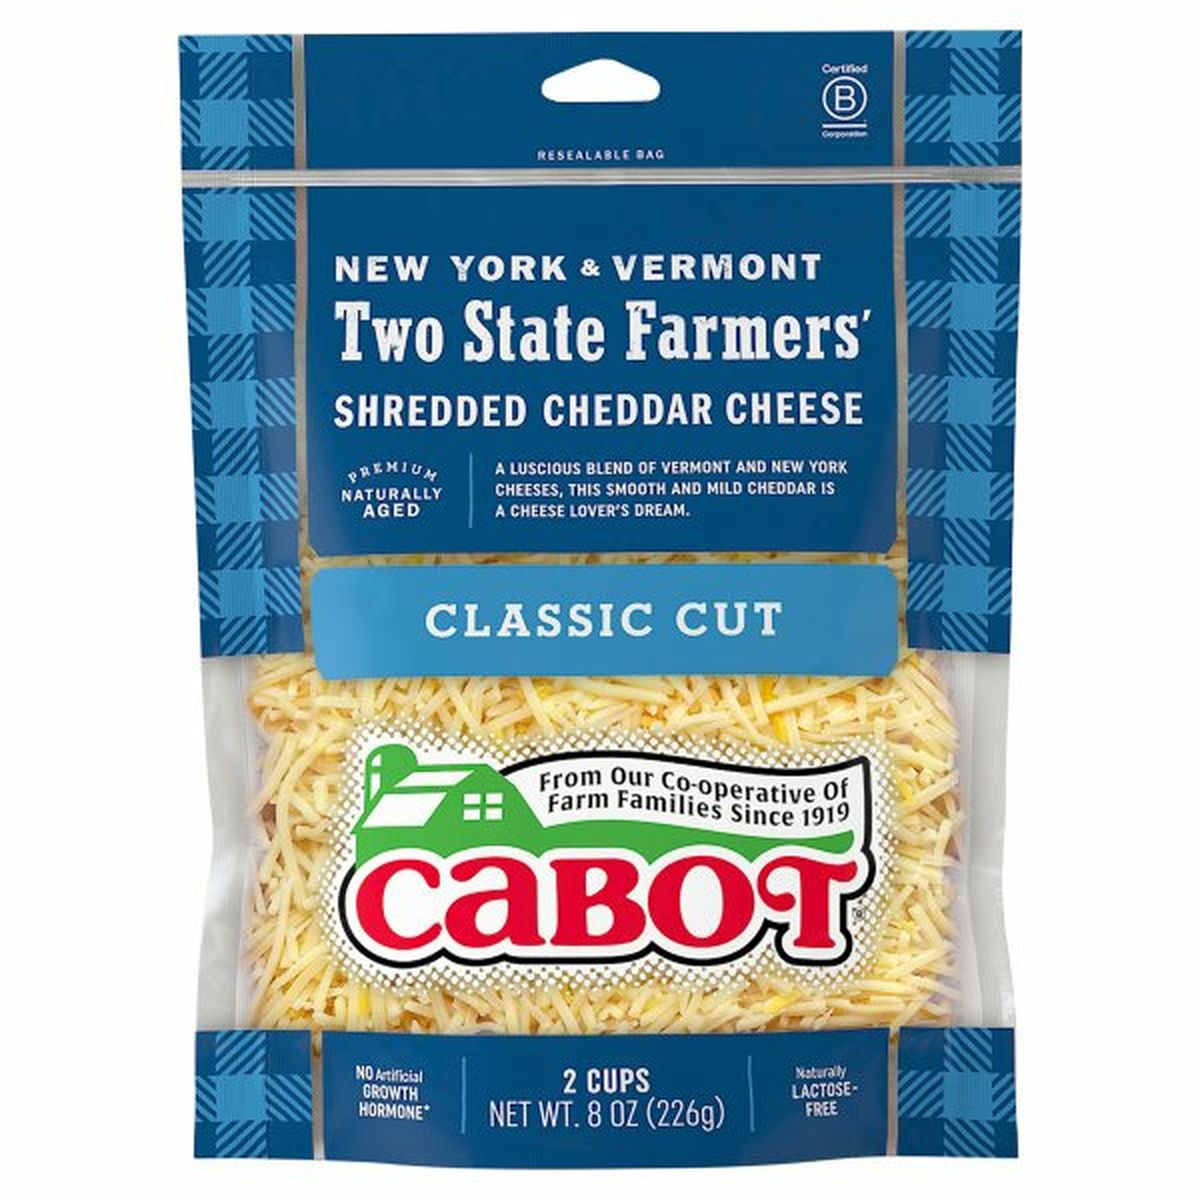 Calories in Cabot Shredded Cheese, Cheddar, Classic Cut